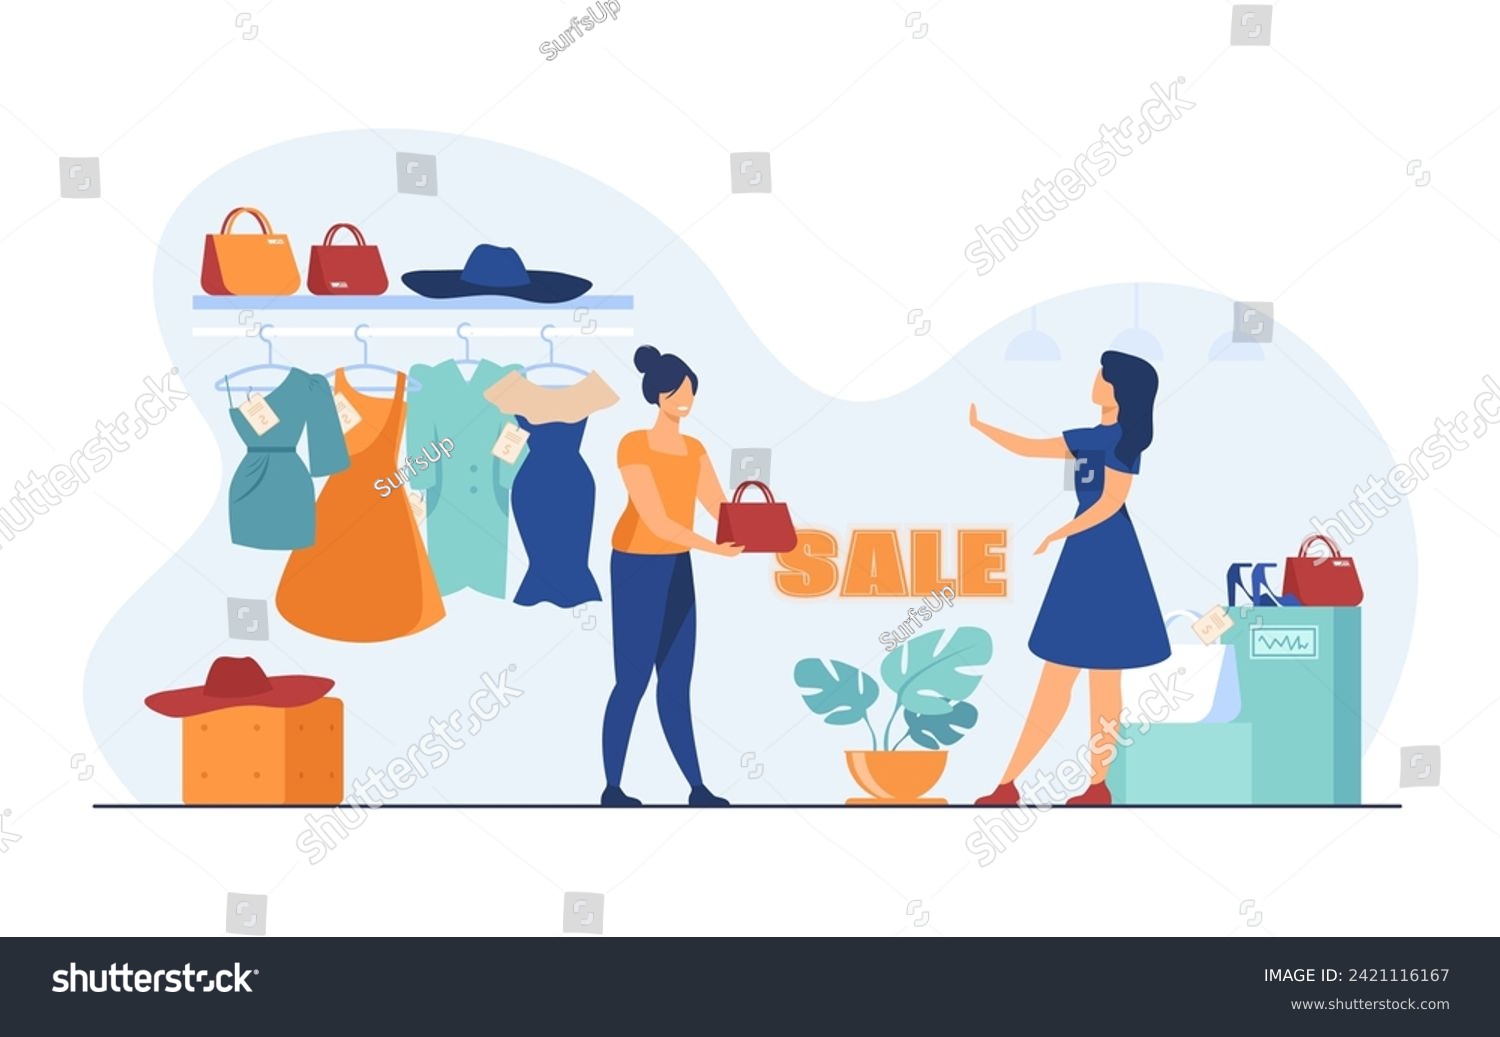 SVG of Female customer refusing to branded bag and choosing clothes in sale. Shop with dresses, hats, bags and shoes. Woman buying less luxury branded clothes. Fashion, sale, shopping concept svg